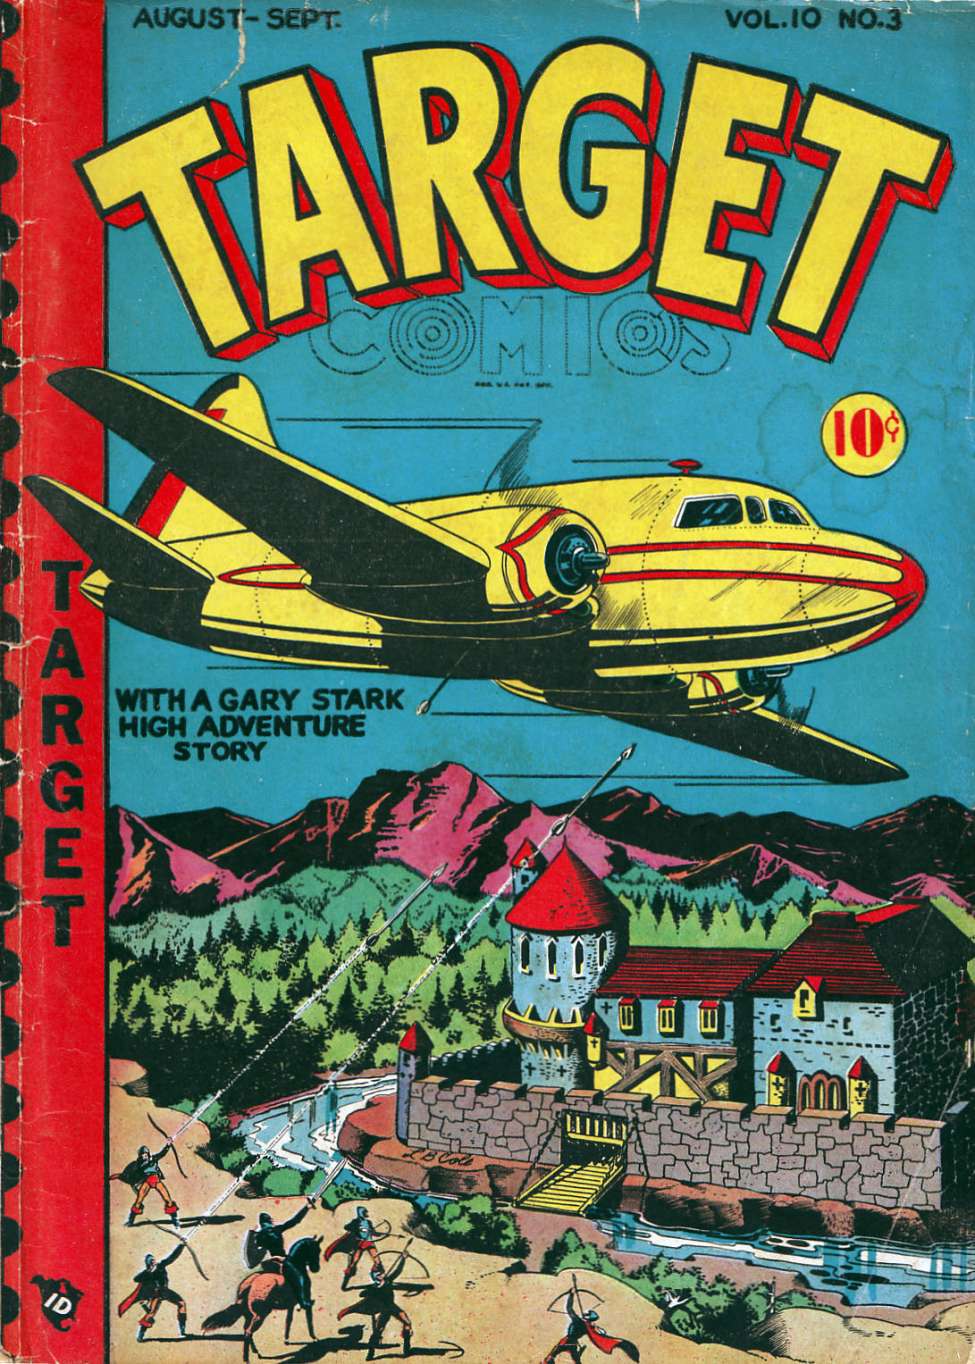 Book Cover For Target Comics v10 3